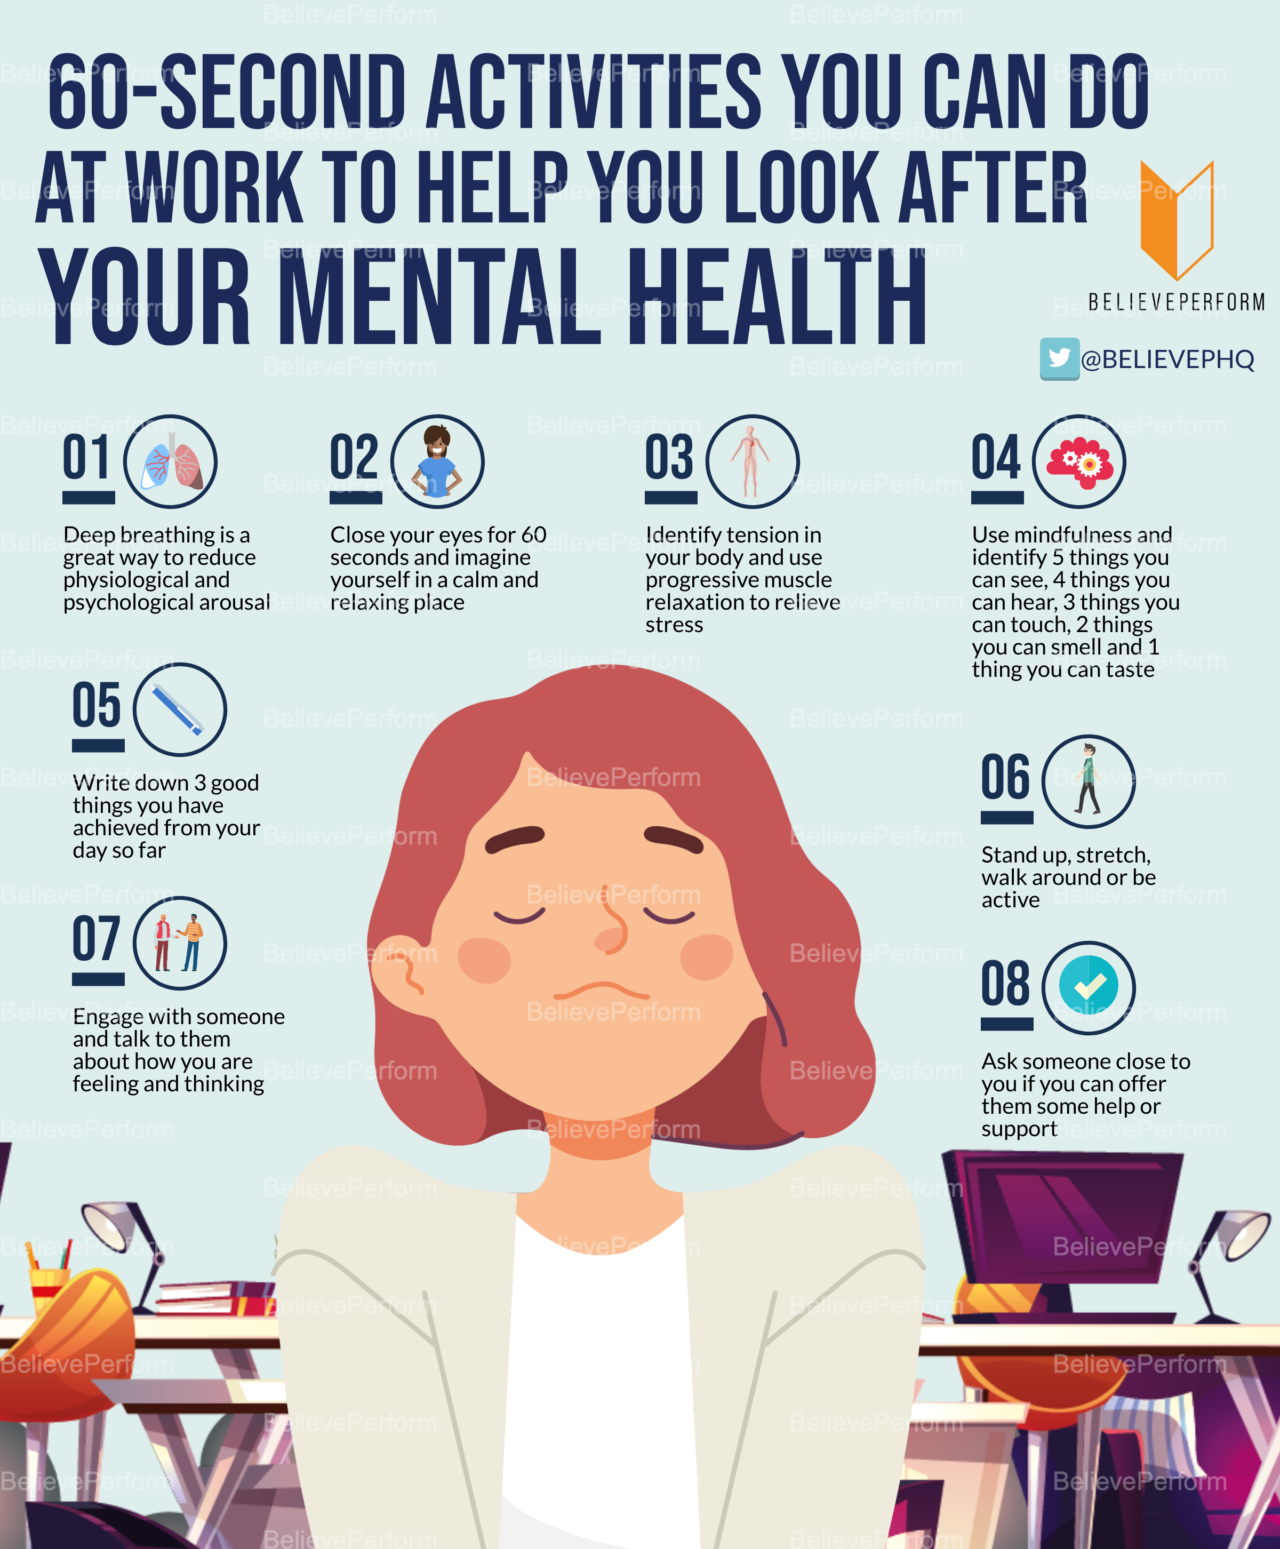 https://believeperform.com/wp-content/uploads/2023/10/60-second-activities-you-can-do-at-work-to-look-after-your-mental-health-1280x1549.png